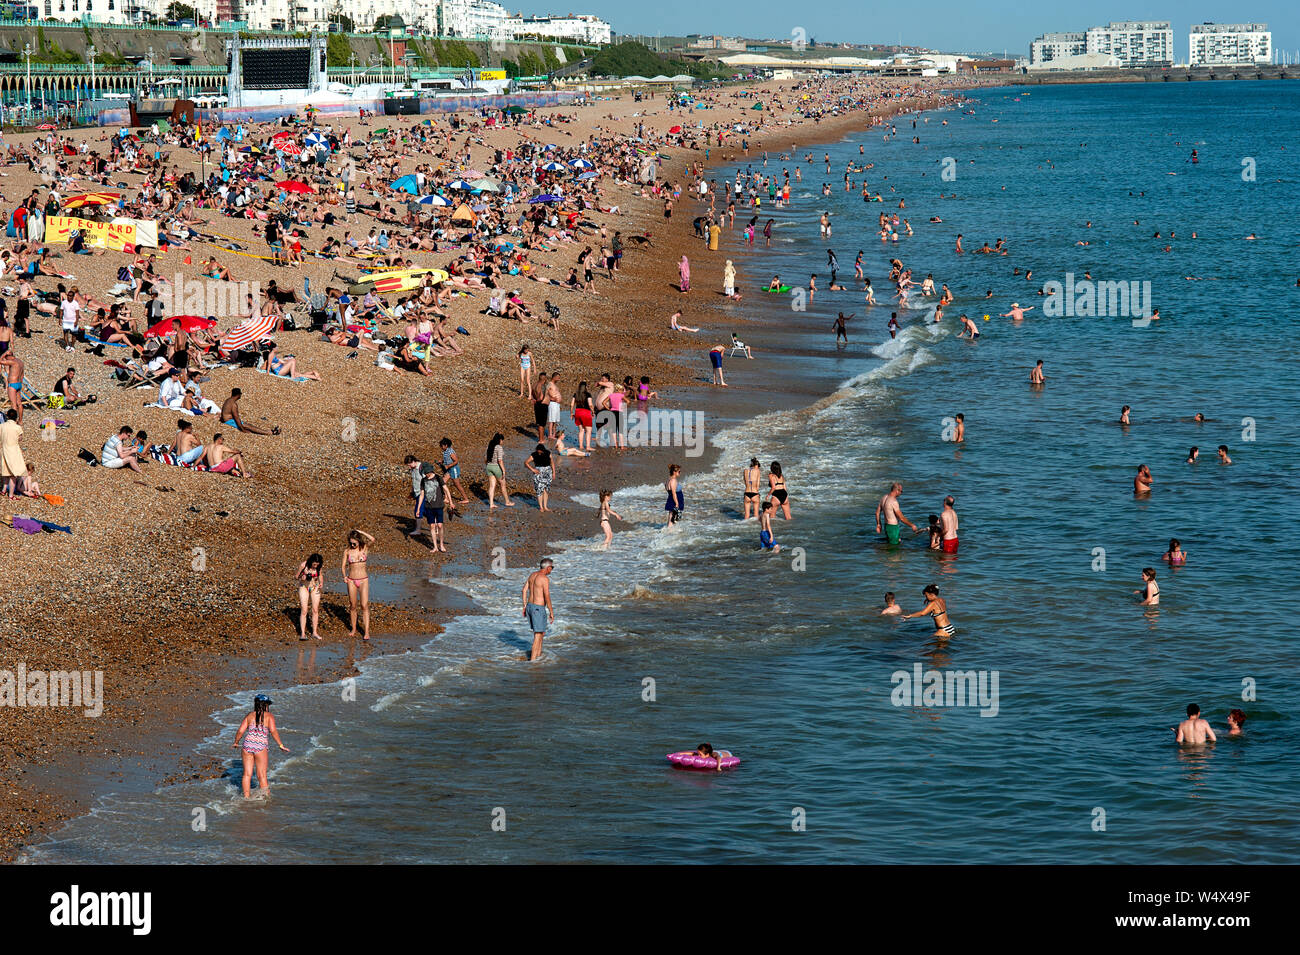 Brighton beach, Sussex, England, July 2019. People flock to the beach in Brighton to sunbathe and swim in the heatwave of July 2019. Stock Photo